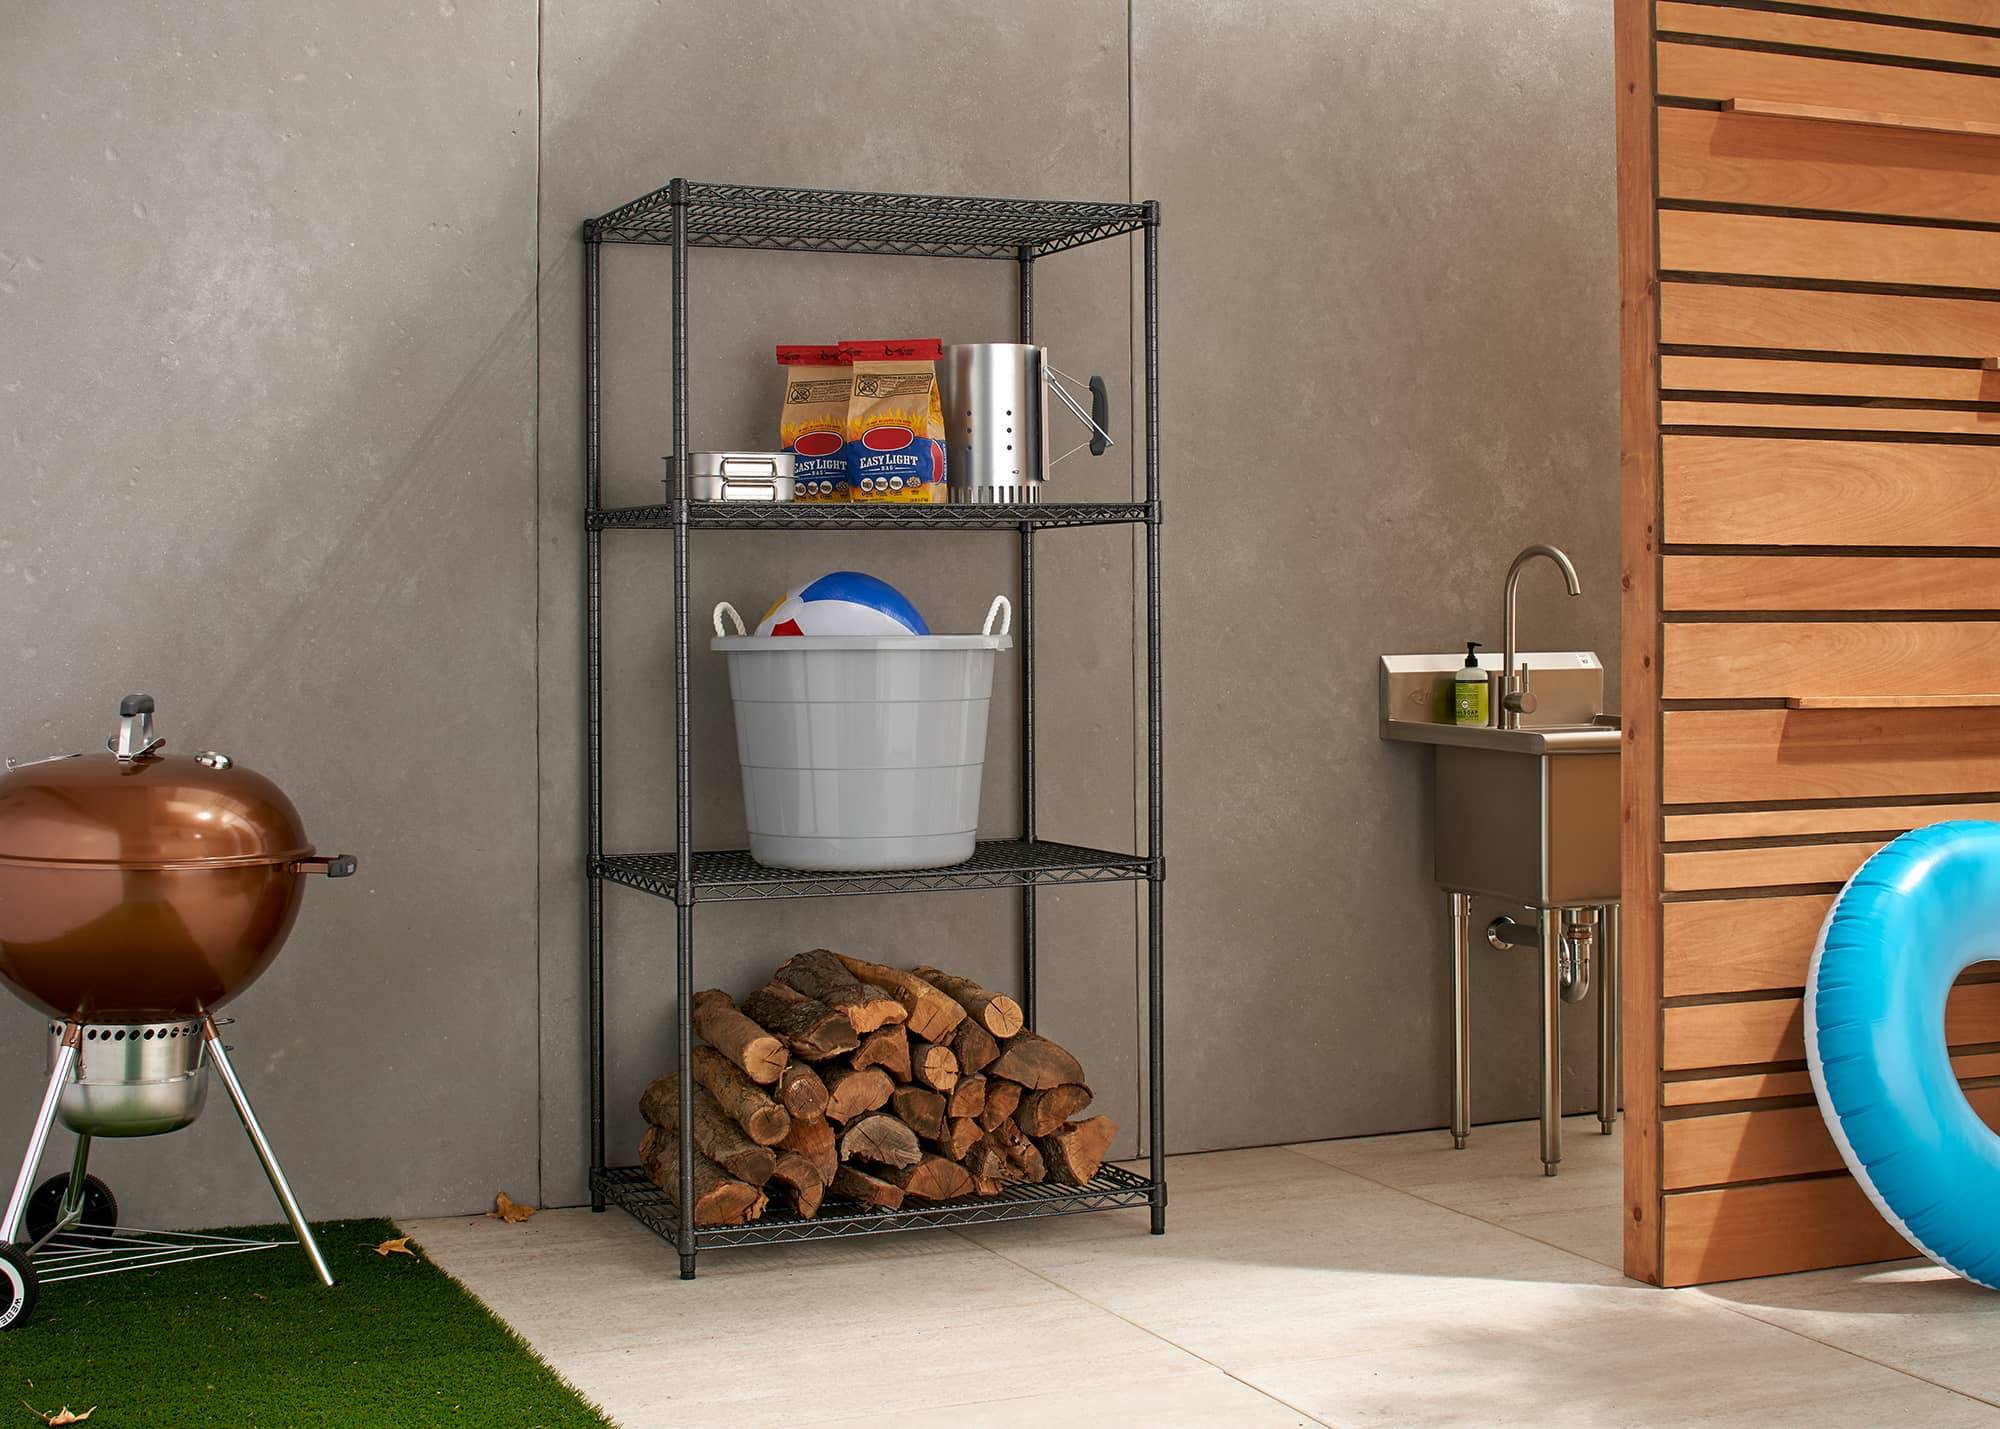 Outdoor wire shelving rack filled with fire wood and other patio kitchen supplies